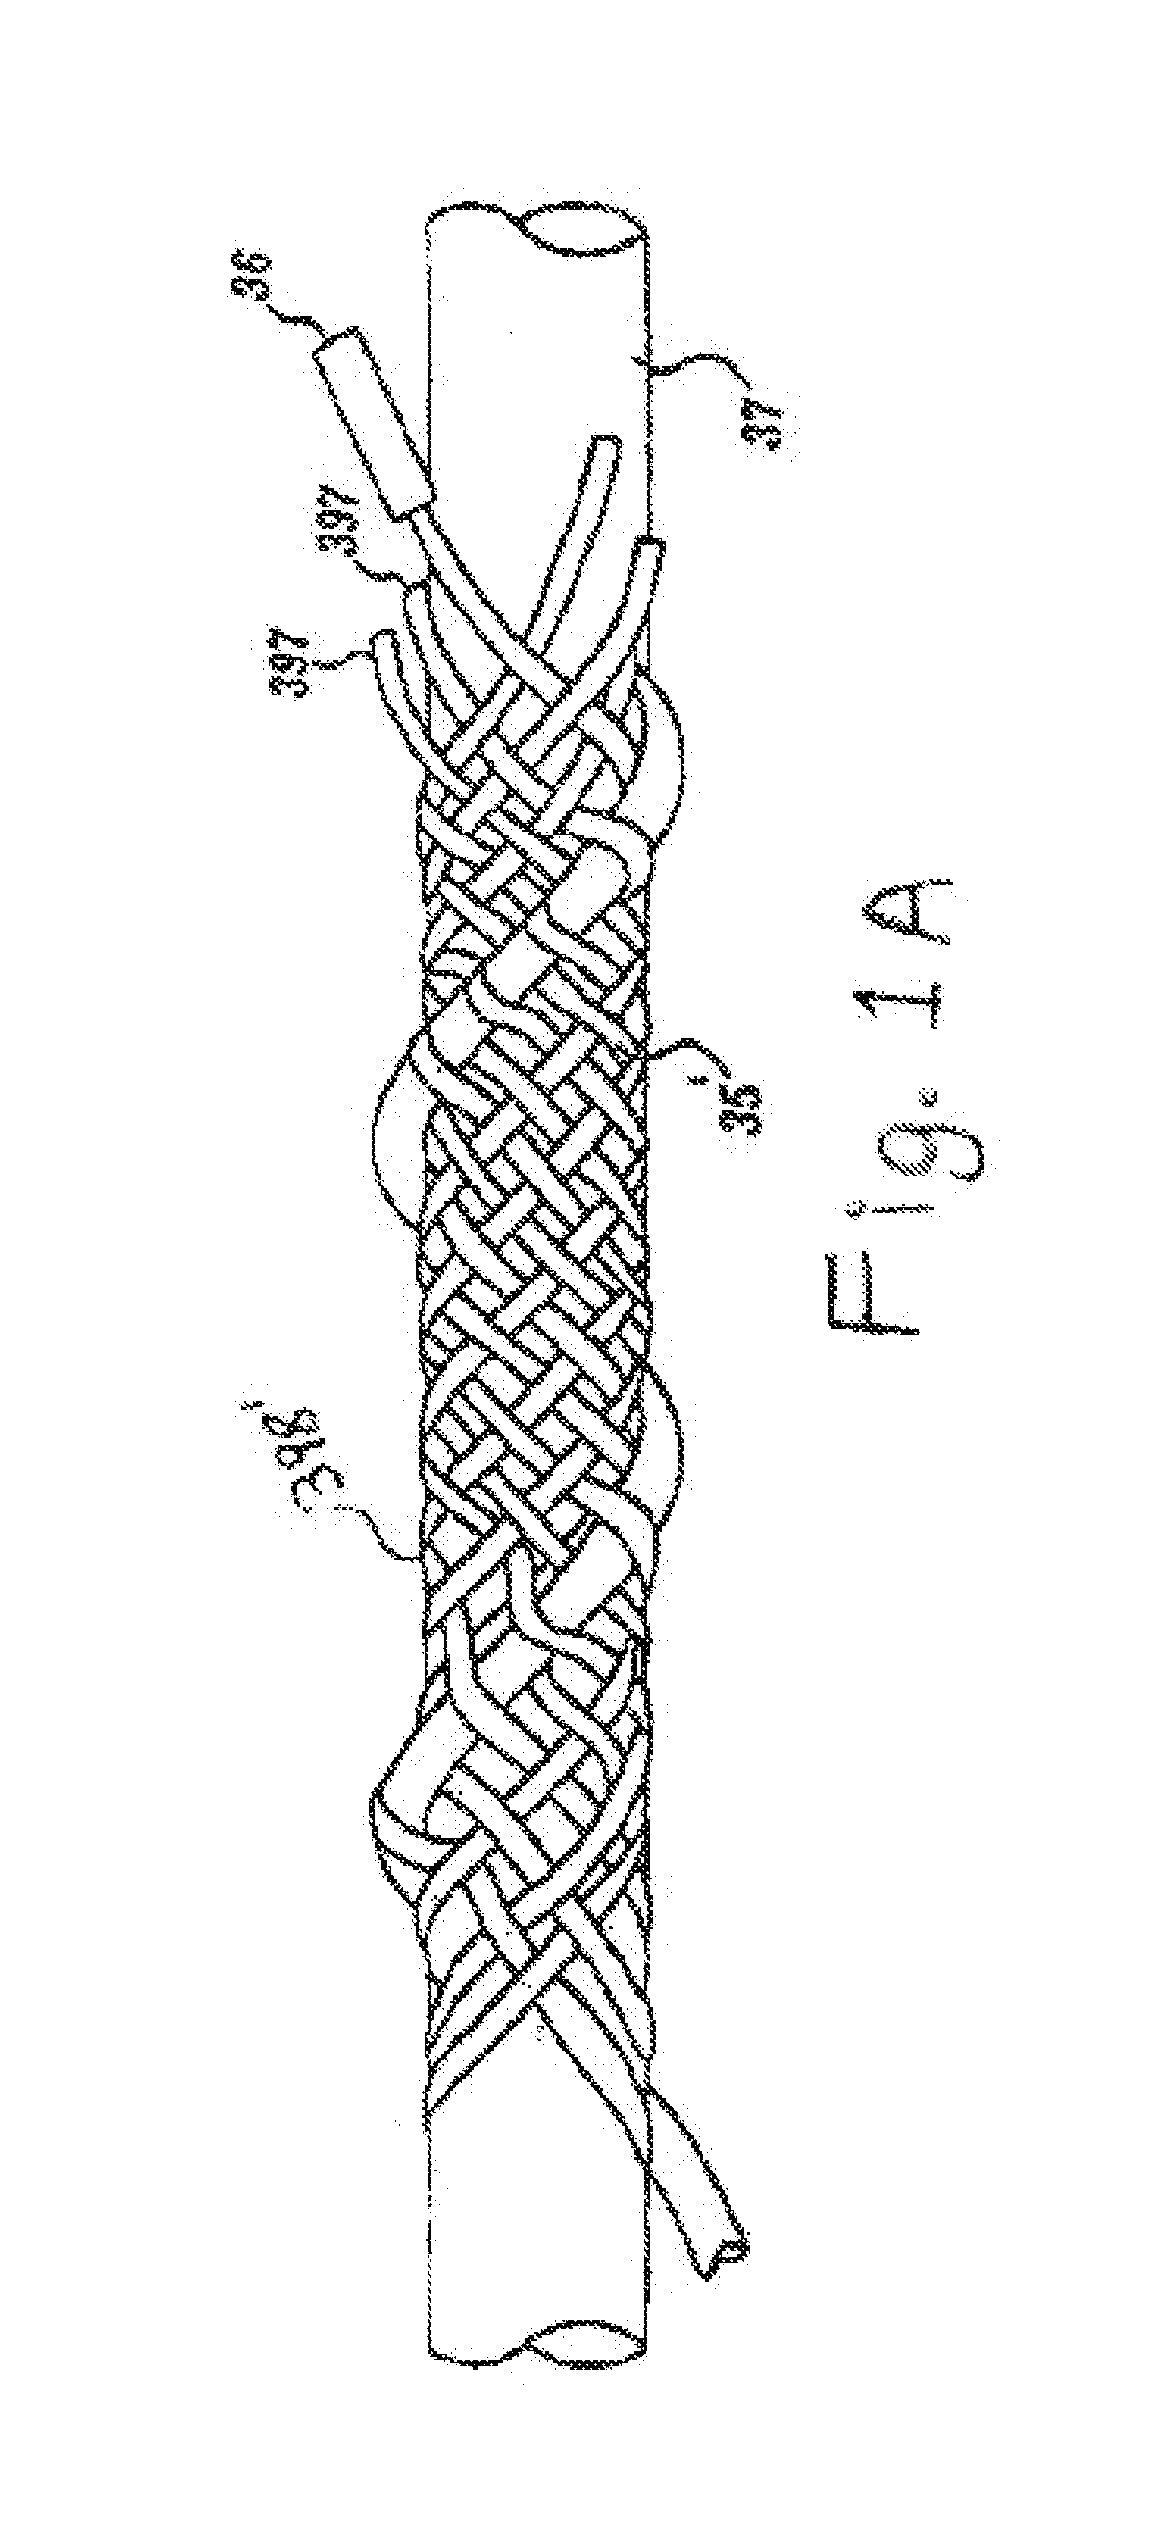 Lower drag helix rope for pelagic trawls and methods